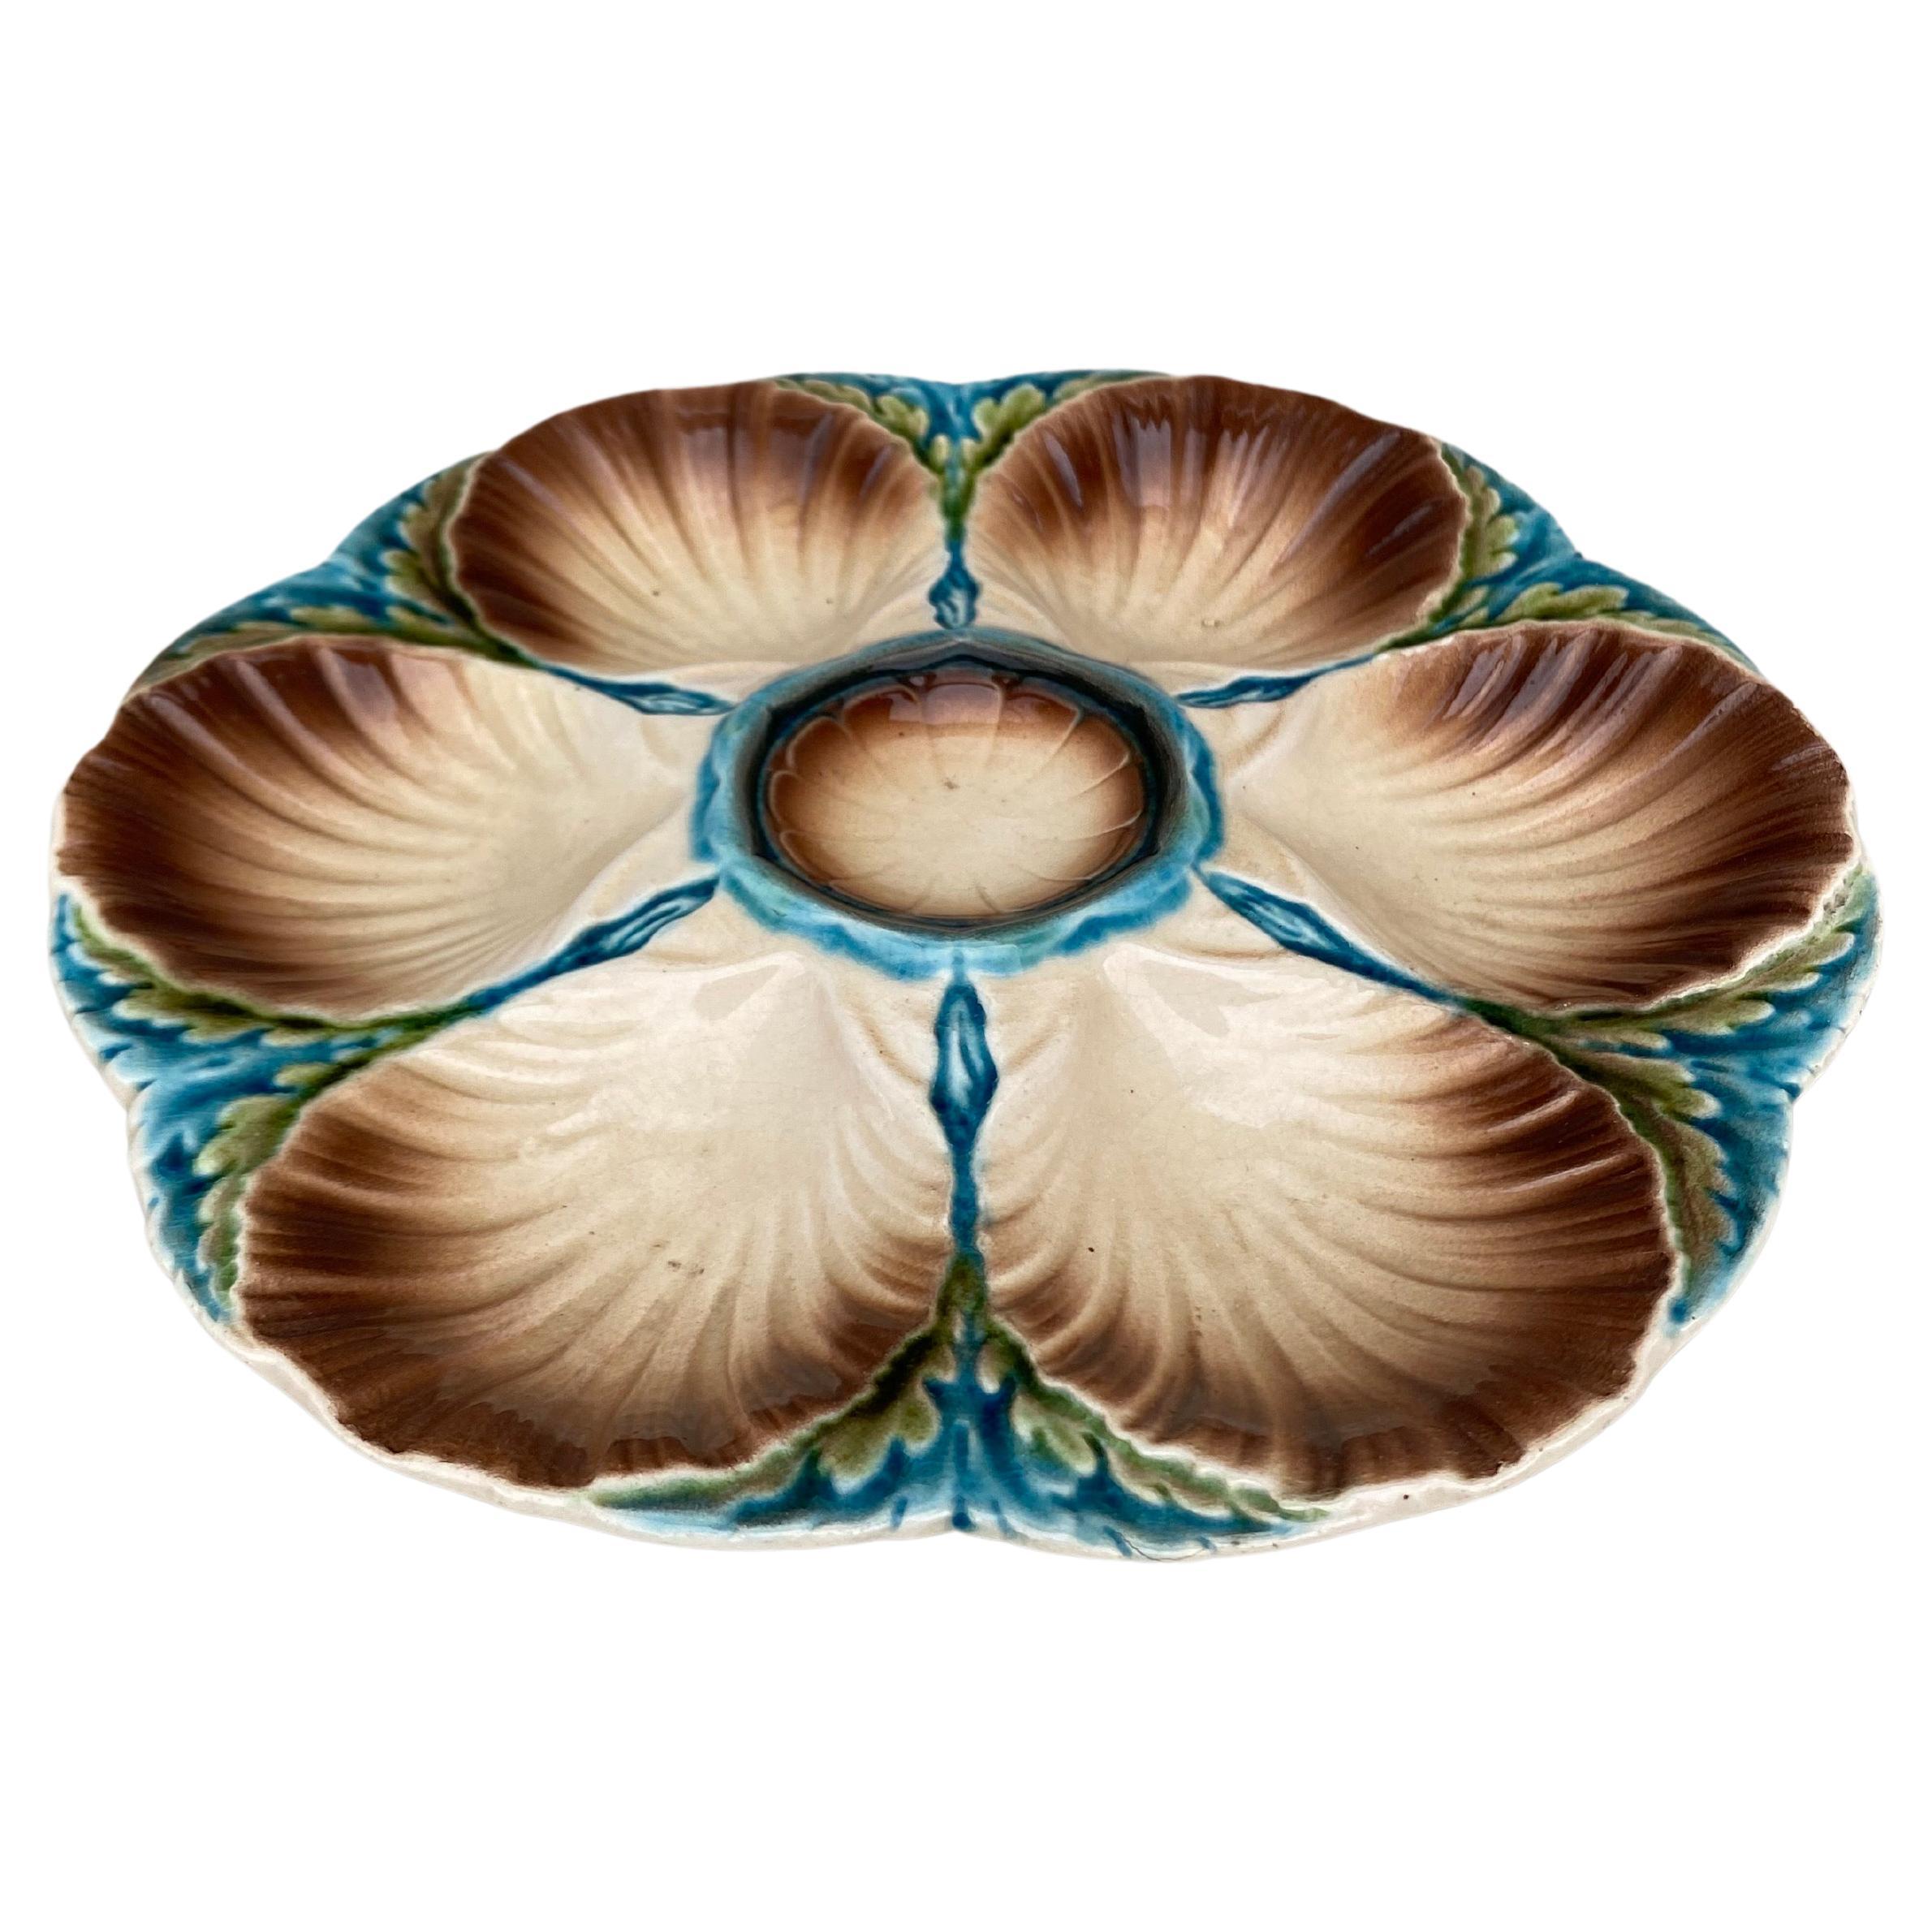 Majolica oyster plate Sarreguemines, circa 1890.
6 shells and space for the lemon on the center.